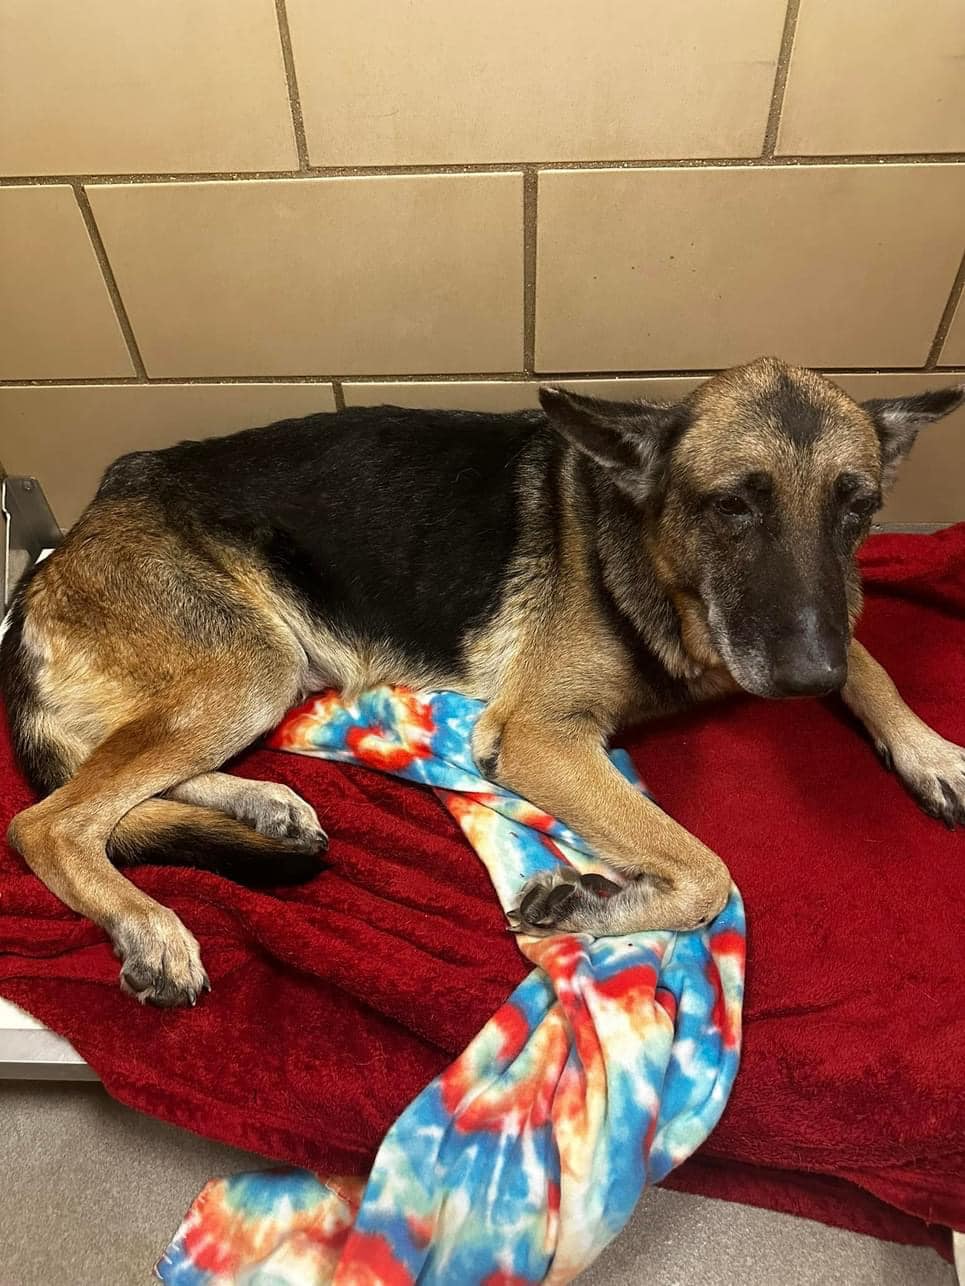 Senior Dog With Medical Issues Urgently In Need Of Rescue To Avoid ...